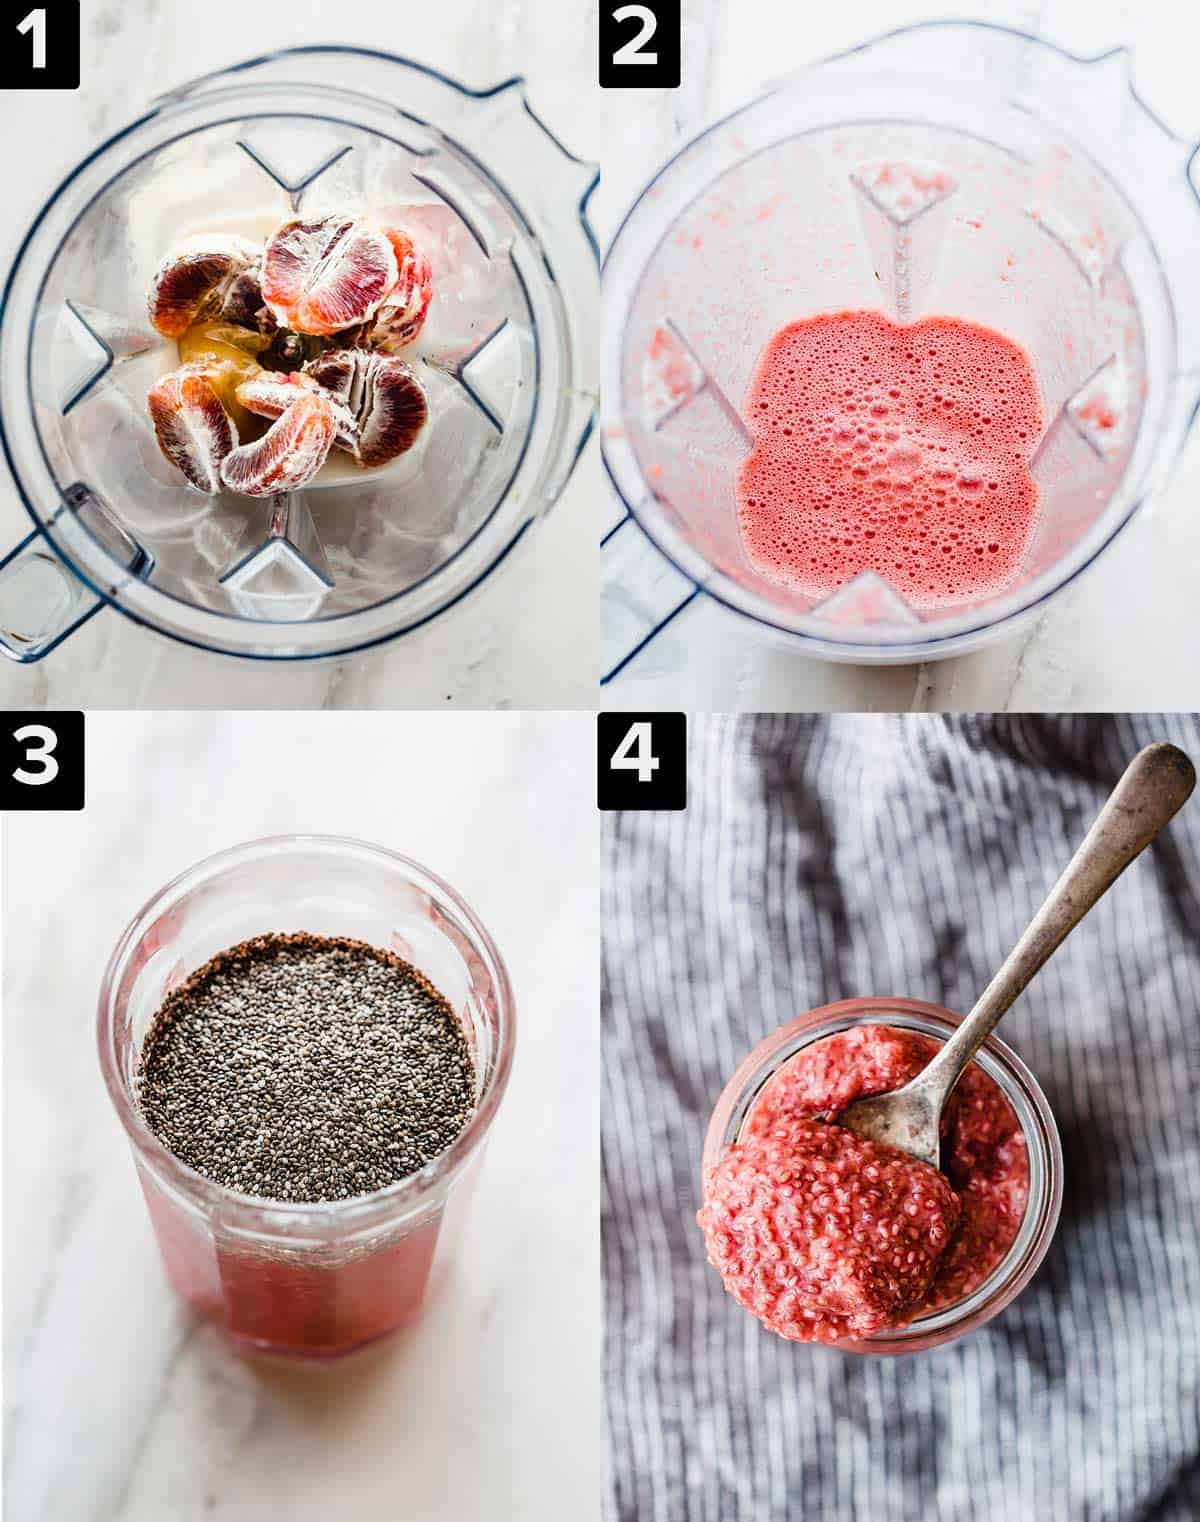 Four images showing how to make Blood Orange Chia Pudding.